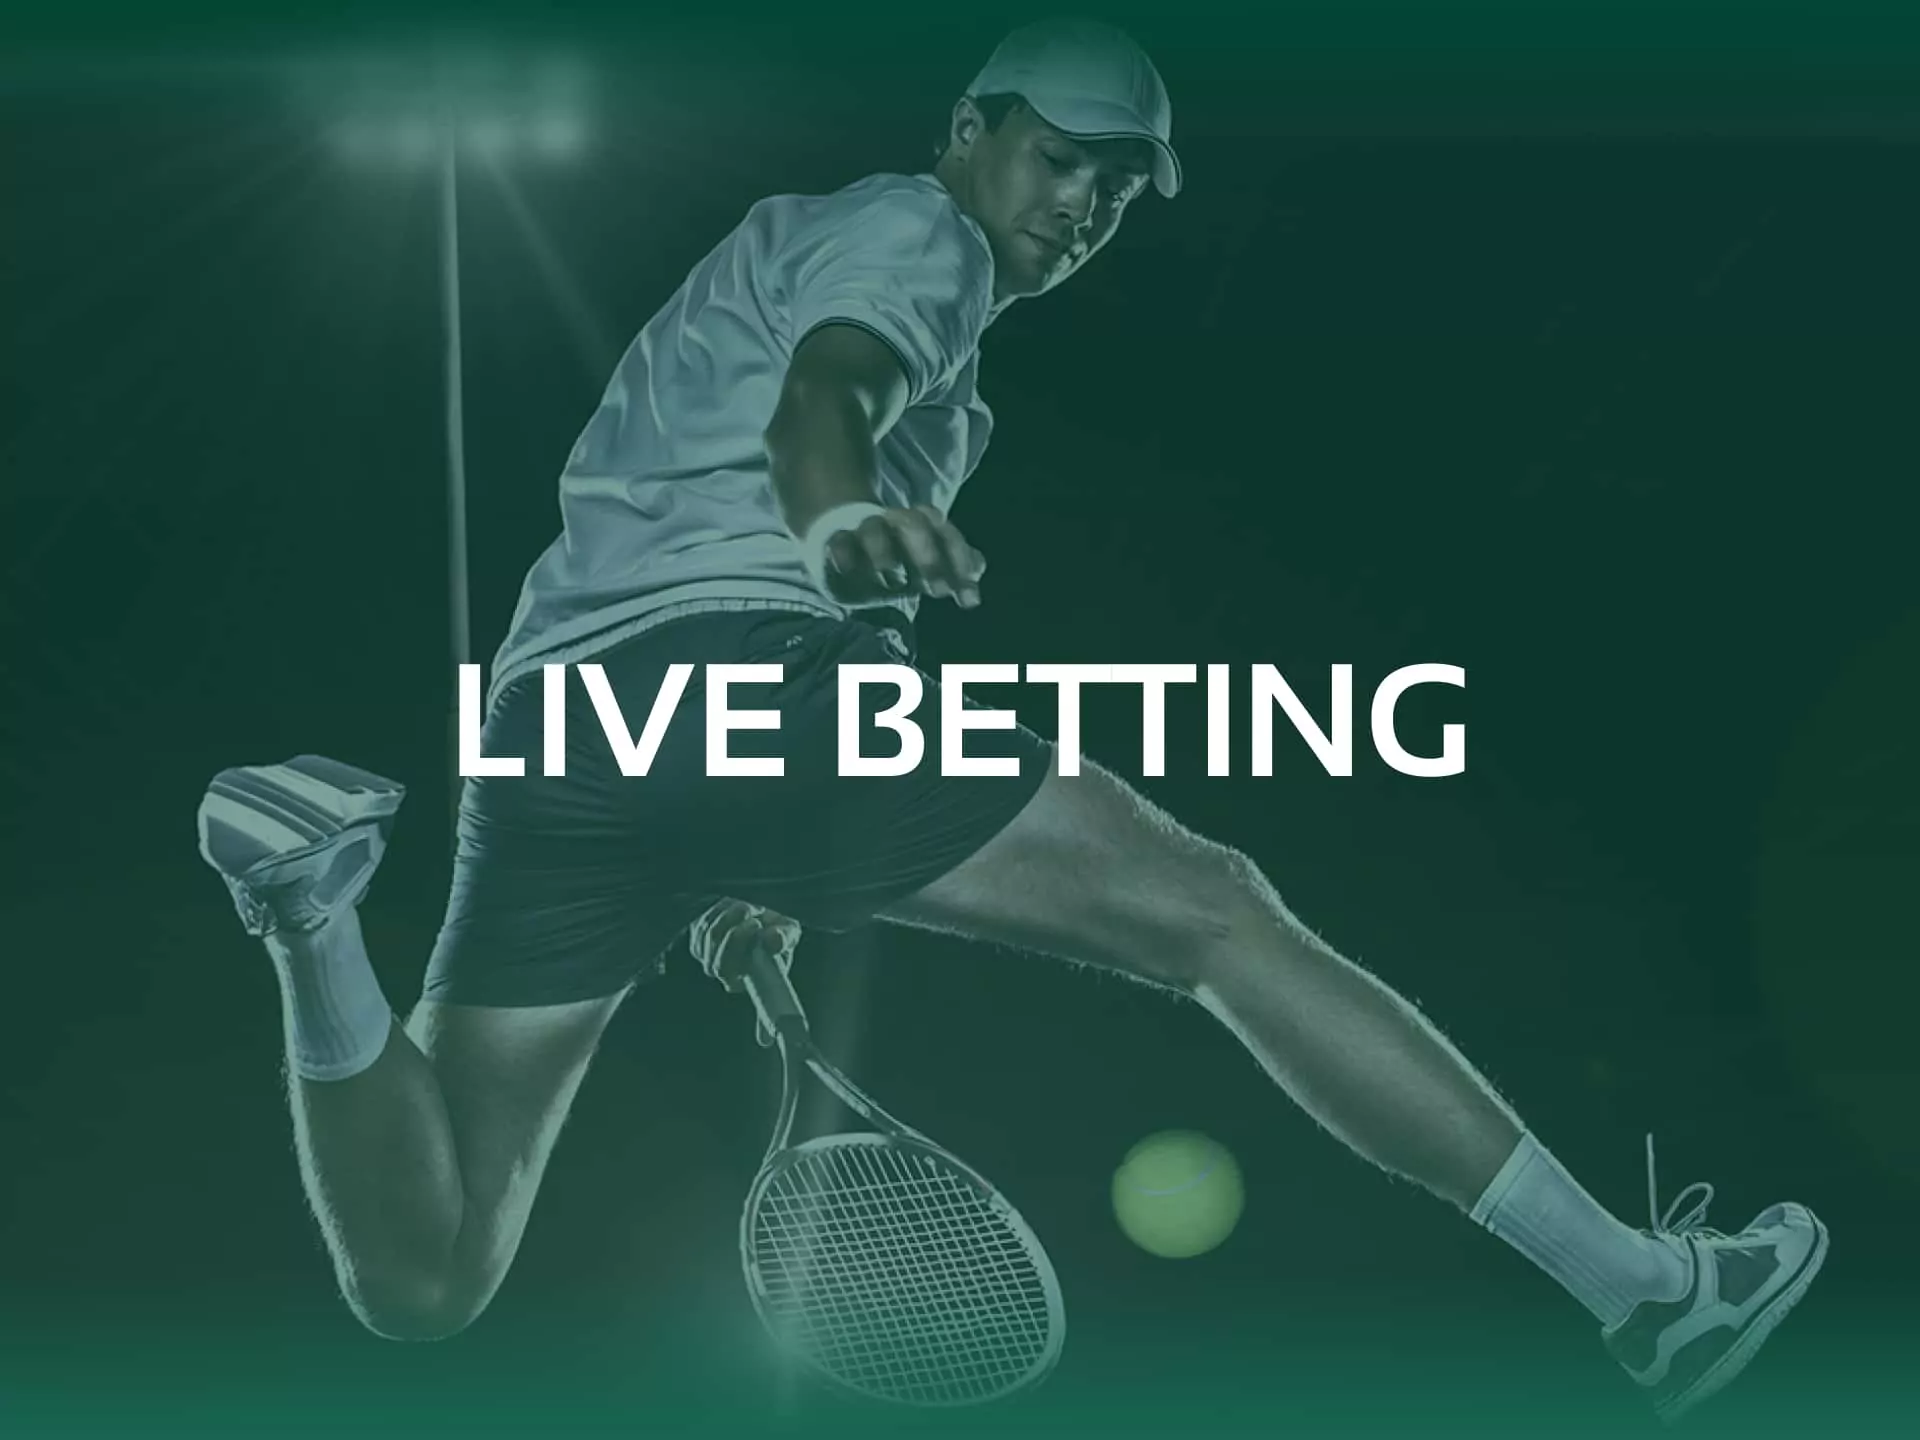 Live bets - betting while the tennis match is being broadcast live.